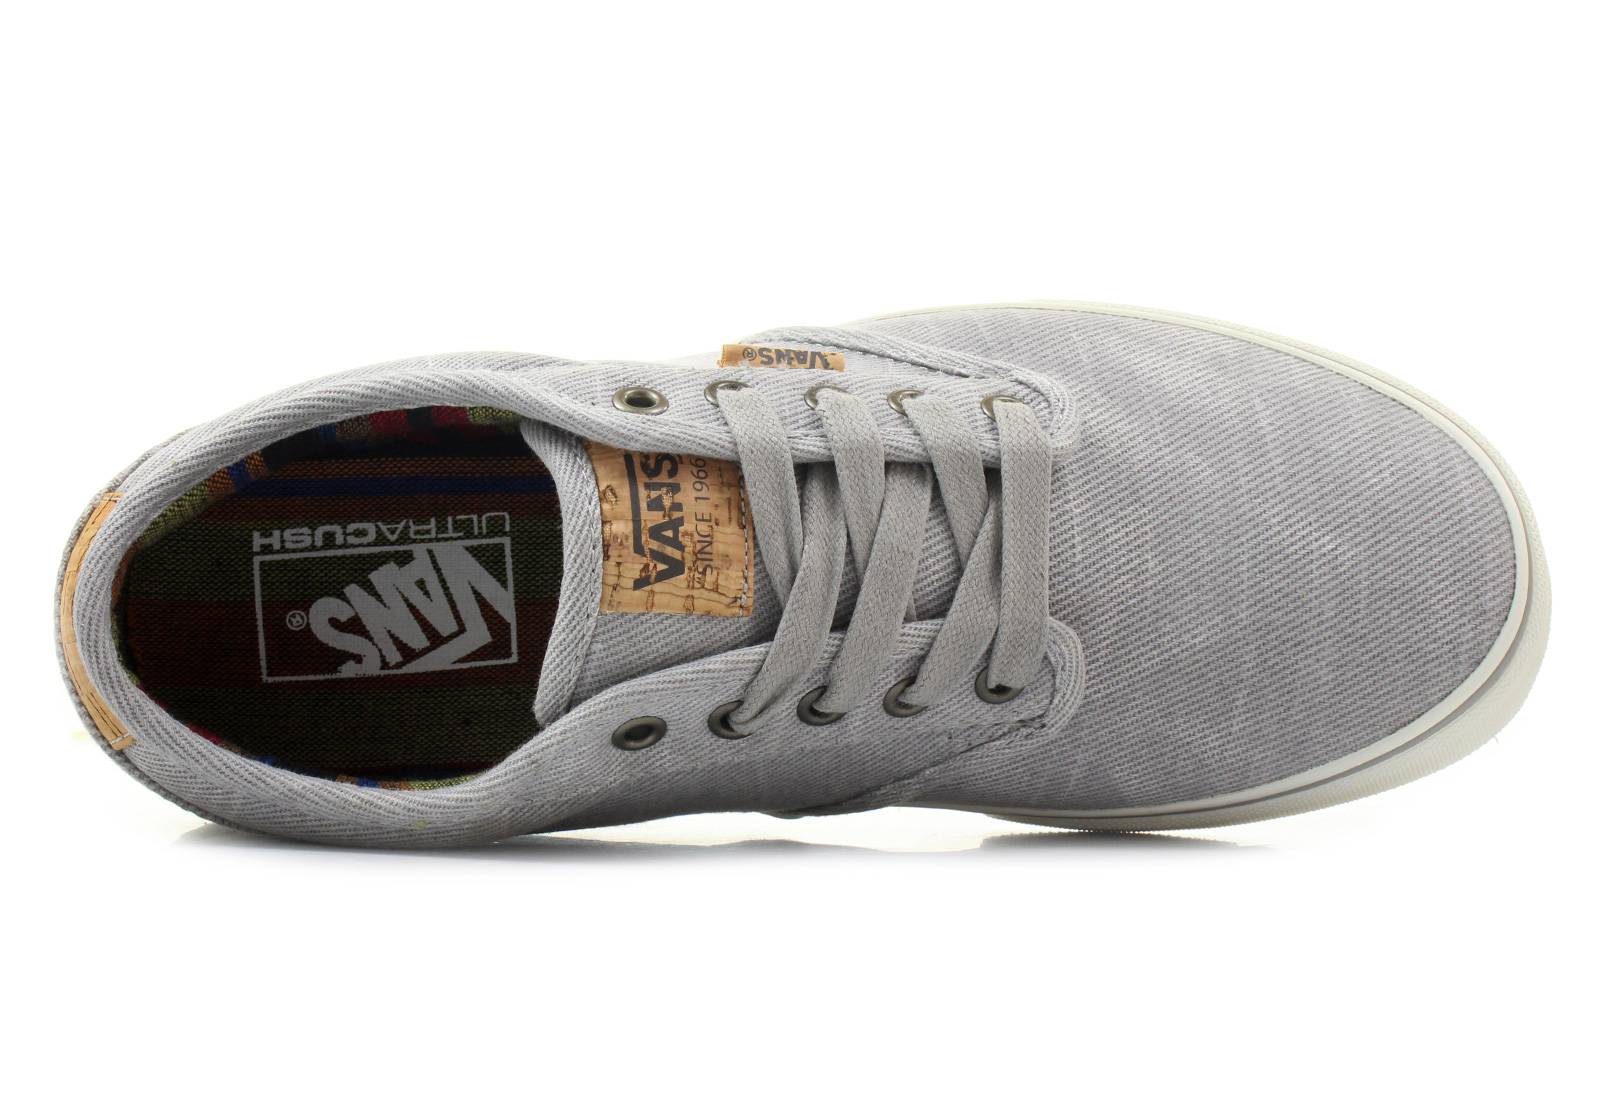 vans atwood deluxe vxb2ill